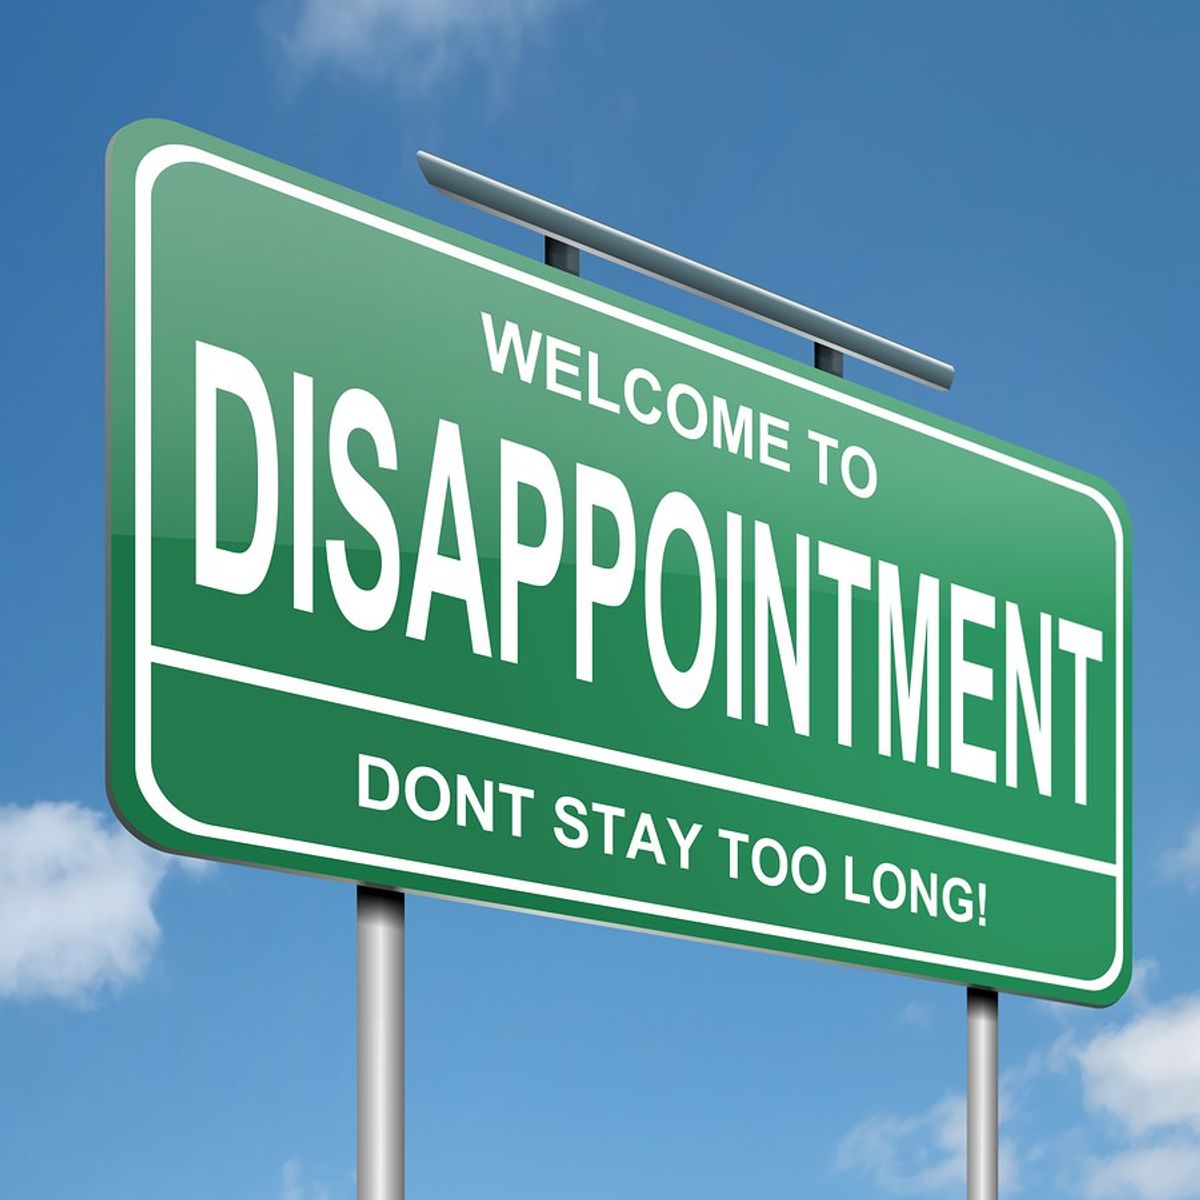 5 Tips To Handle Disappointment